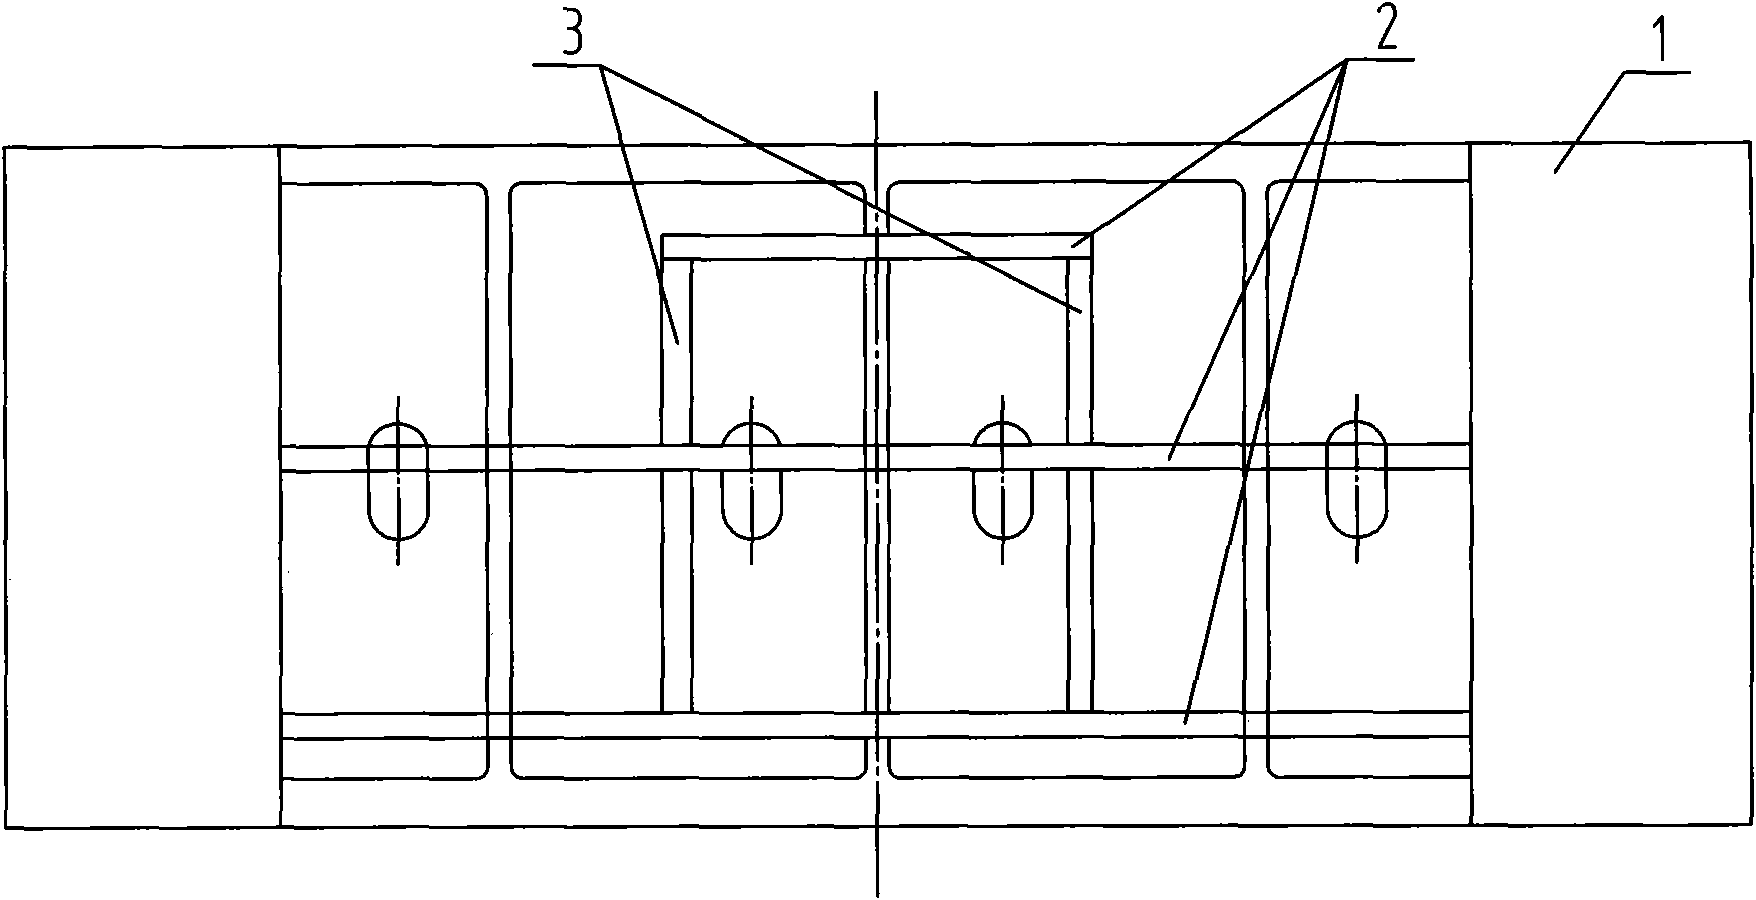 On-line repairing method for fractured upper beam for hydraulic press casting and structure reinforcing device